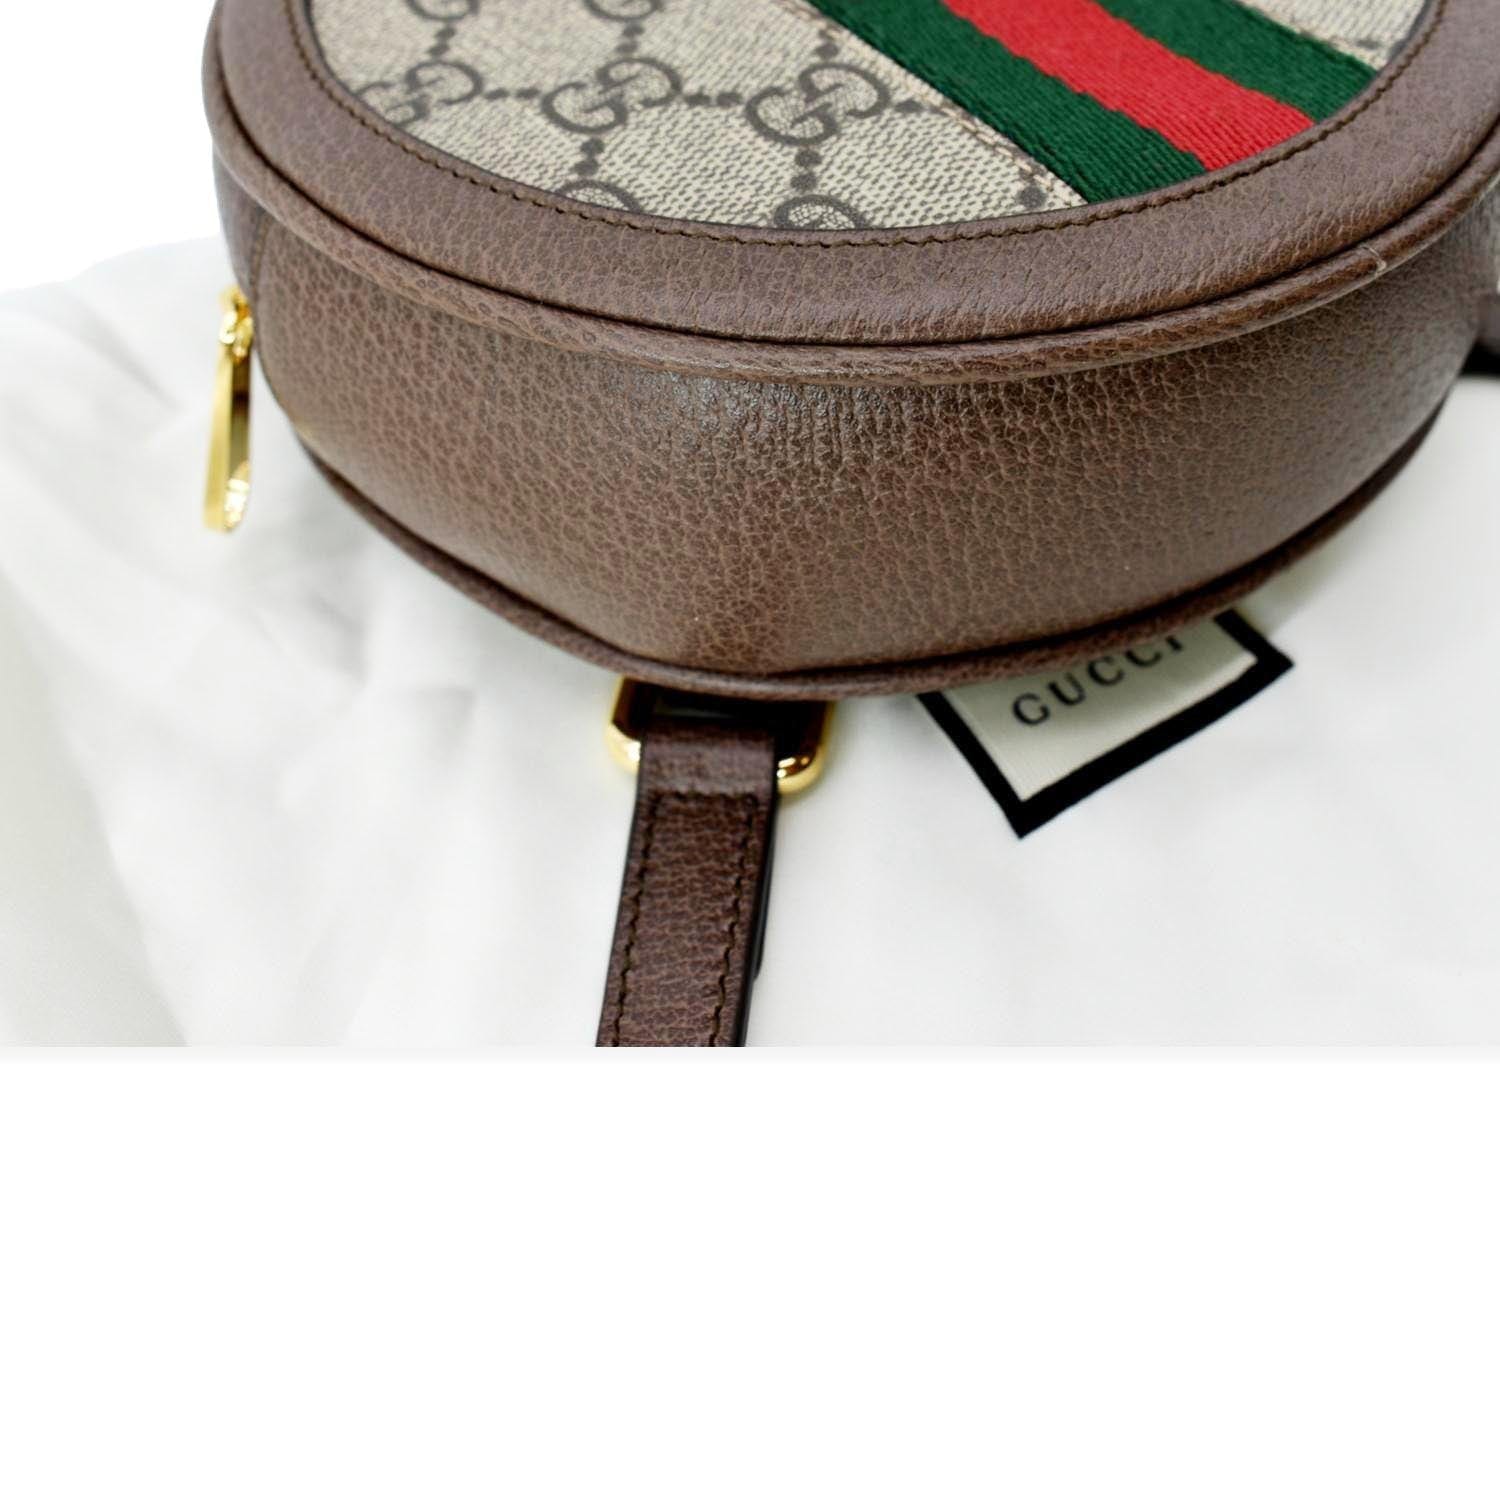 Gucci Ophidia GG Mini Backpack in Brown